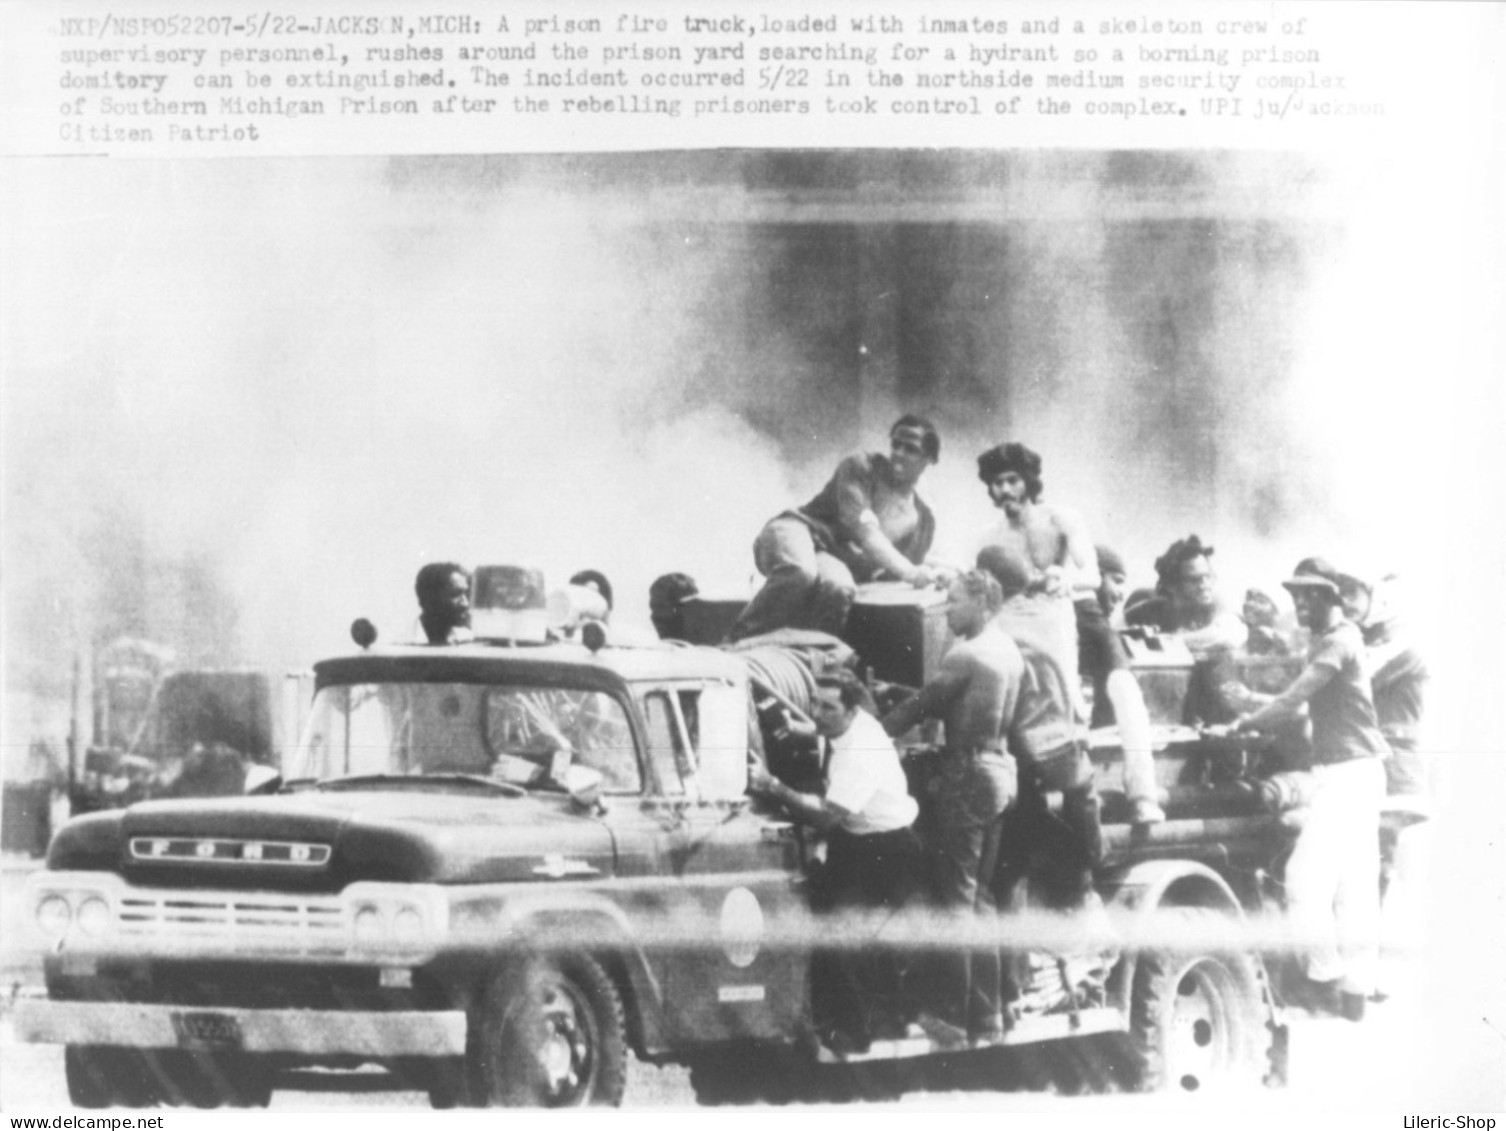 PHOTO AFP - INMATES AT MICHIGAN PRISON RIOT AND START SEVERAL FIRES May 22, 1981 - FIRE TRUCK FORD F600 SIZE 180X240 Mm - Amérique